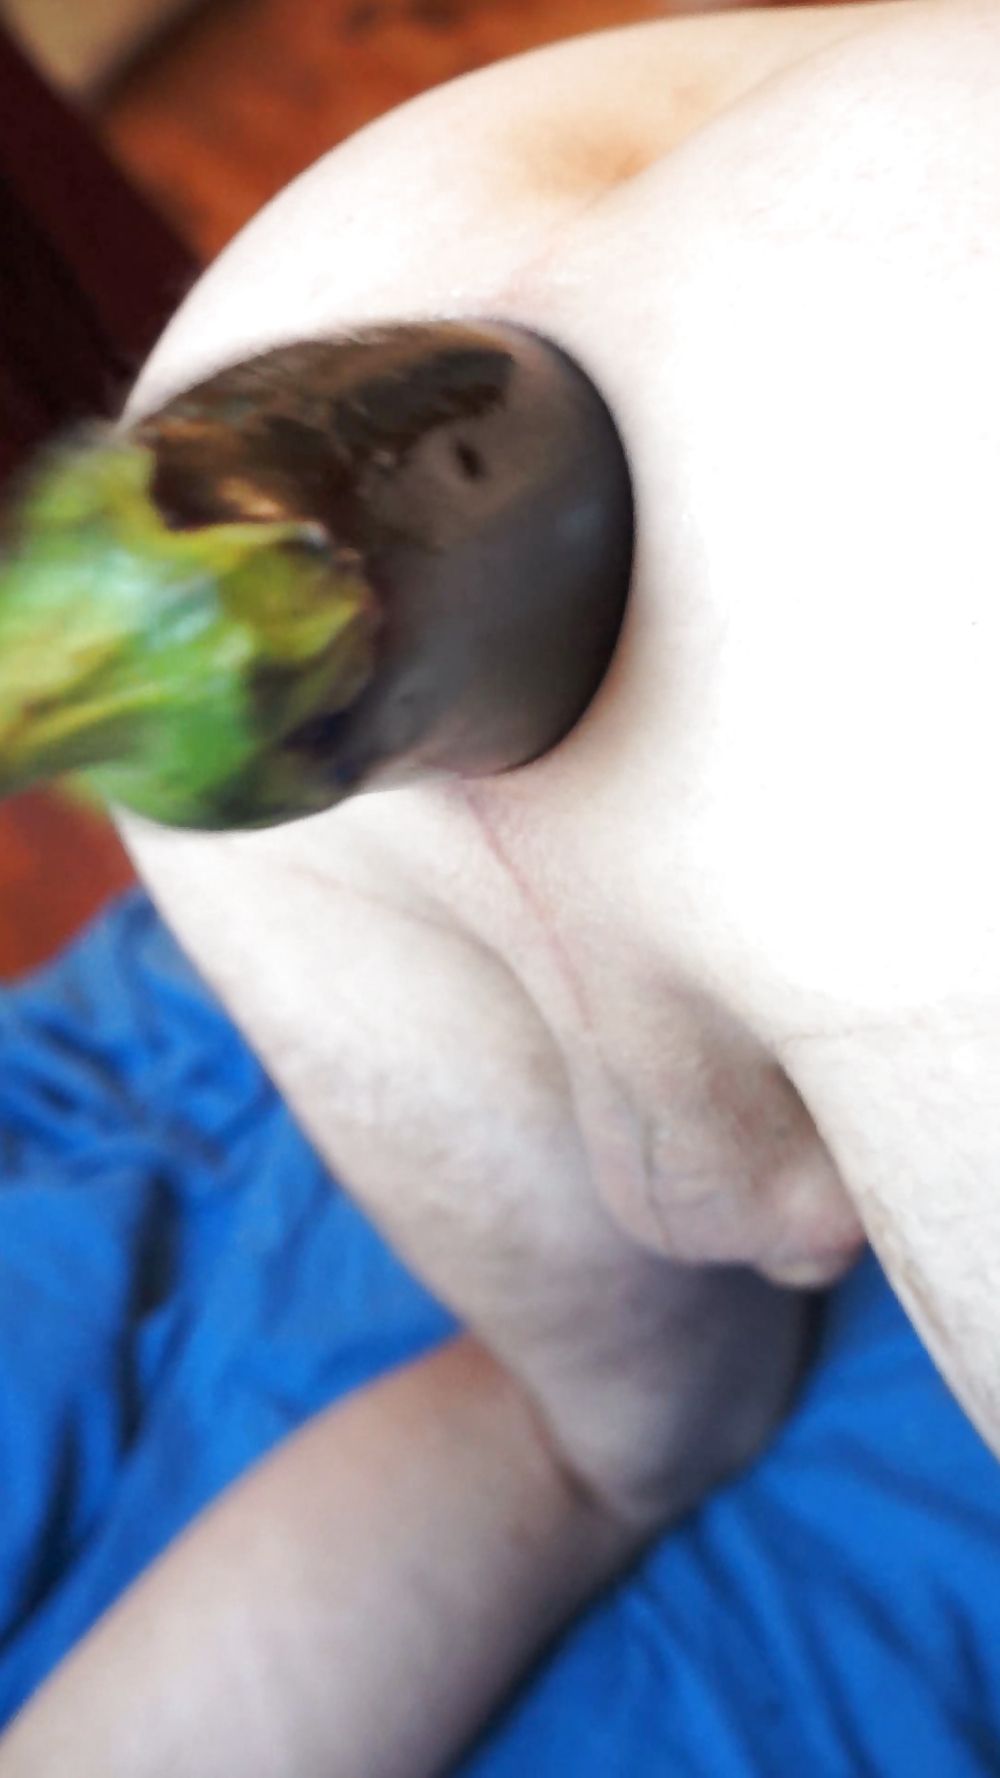 My gape record 7,95 cm asshole spread gaping hole june 2013 #12